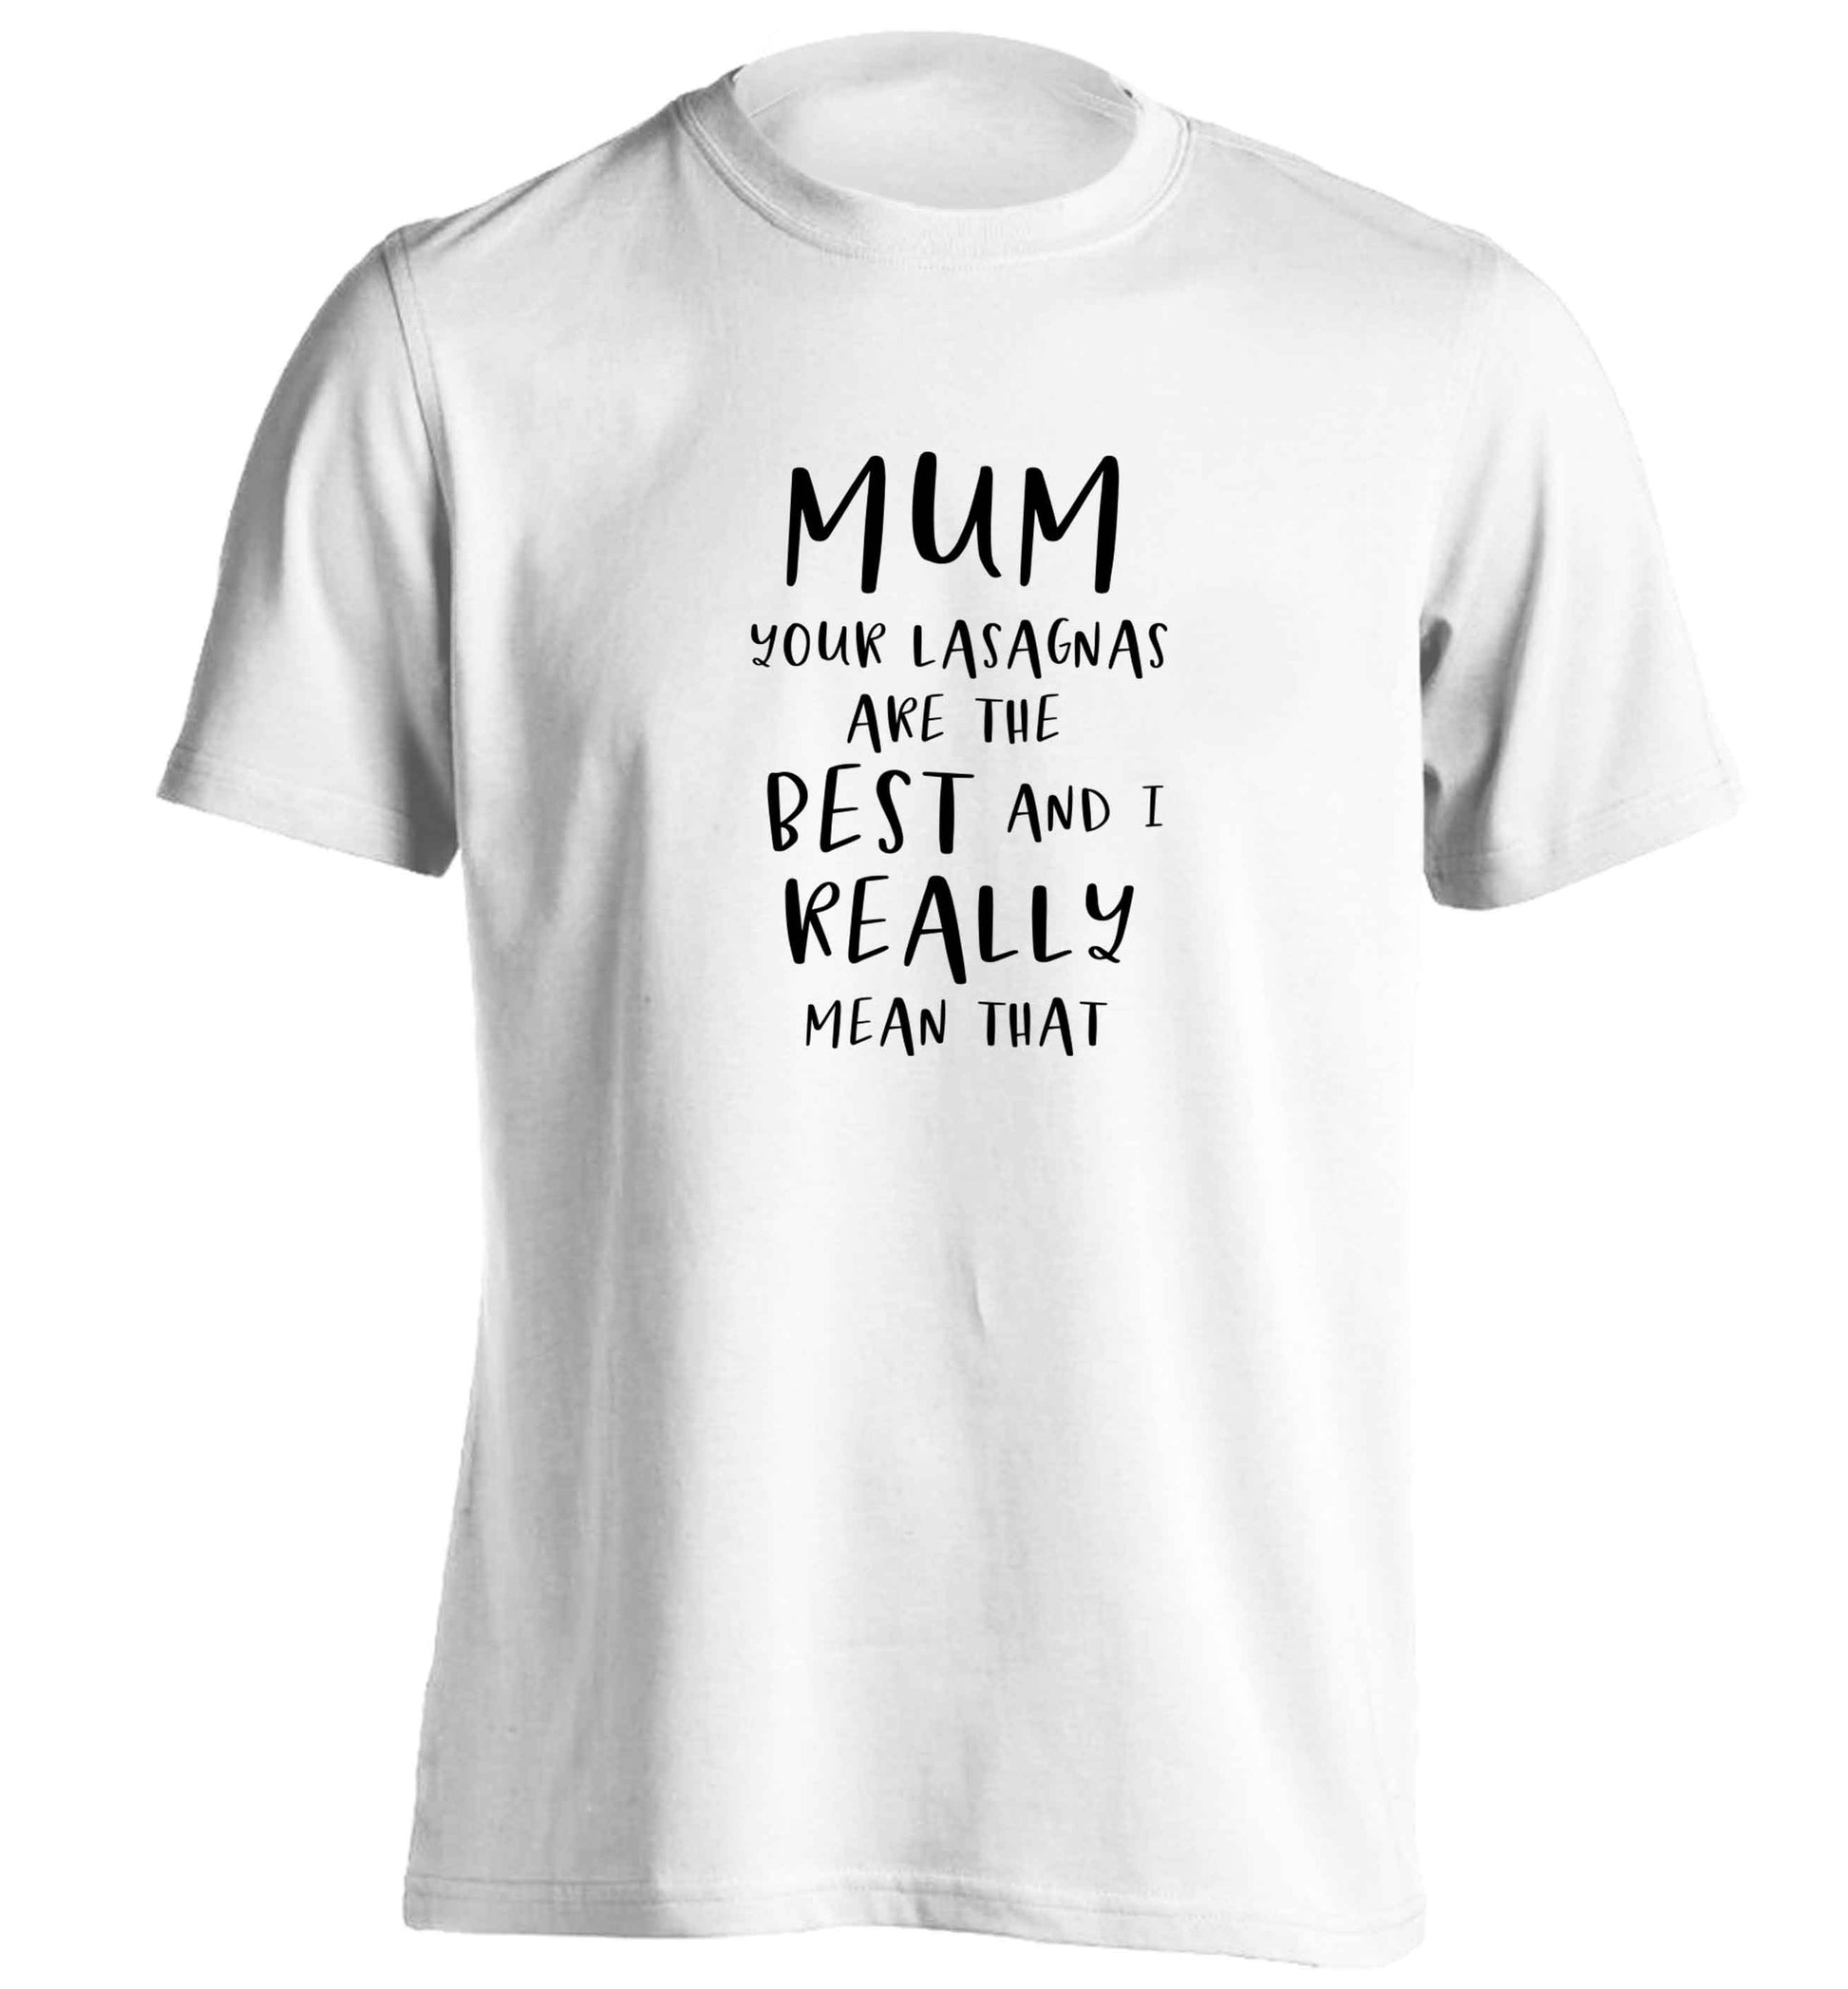 Funny gifts for your mum on mother's dayor her birthday! Mum your lasagnas are the best and I really mean that adults unisex white Tshirt 2XL